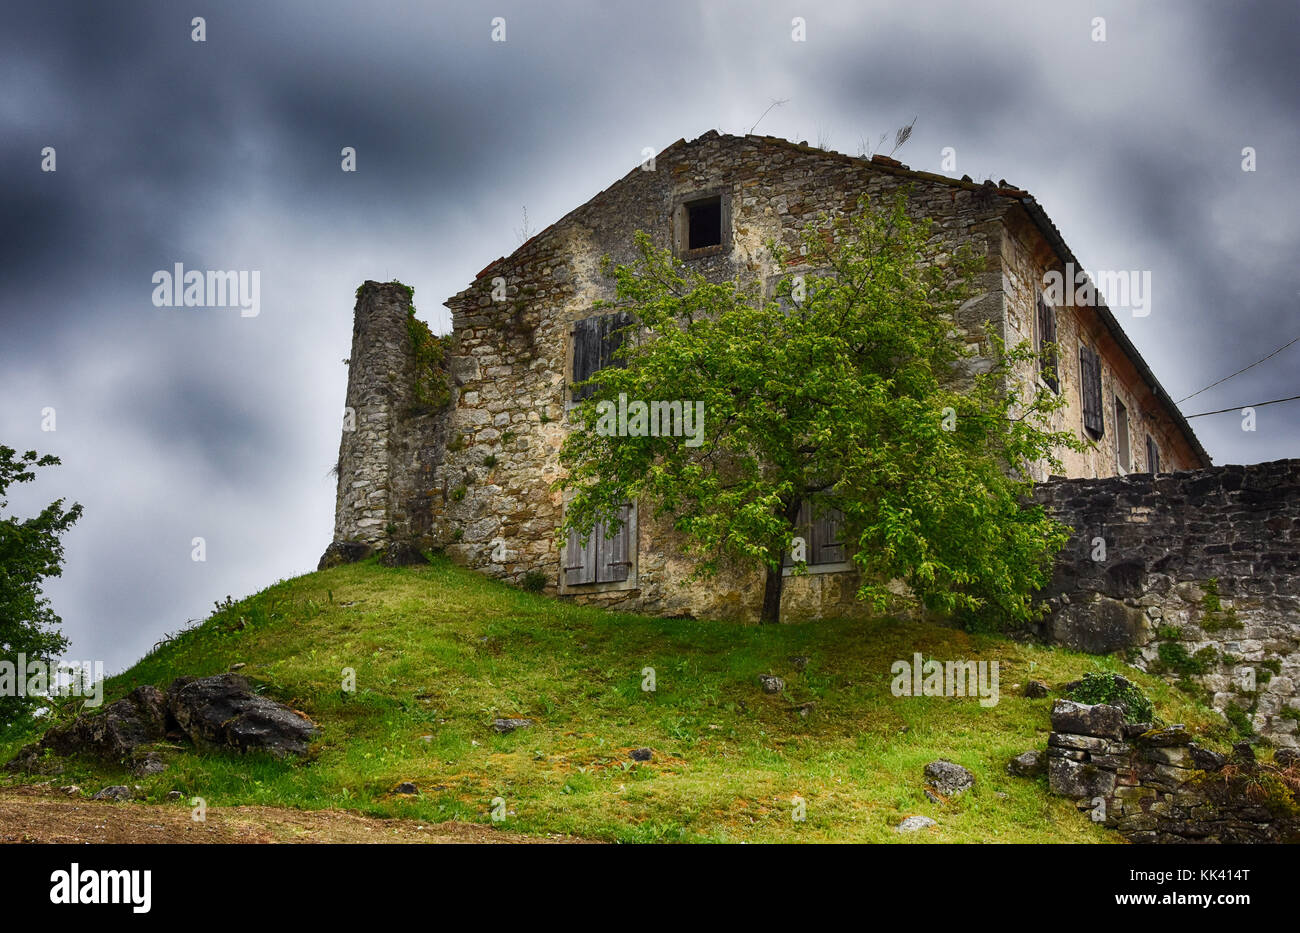 Abandoned house, Hum smallest town in the world, Istria , Croatia Stock Photo